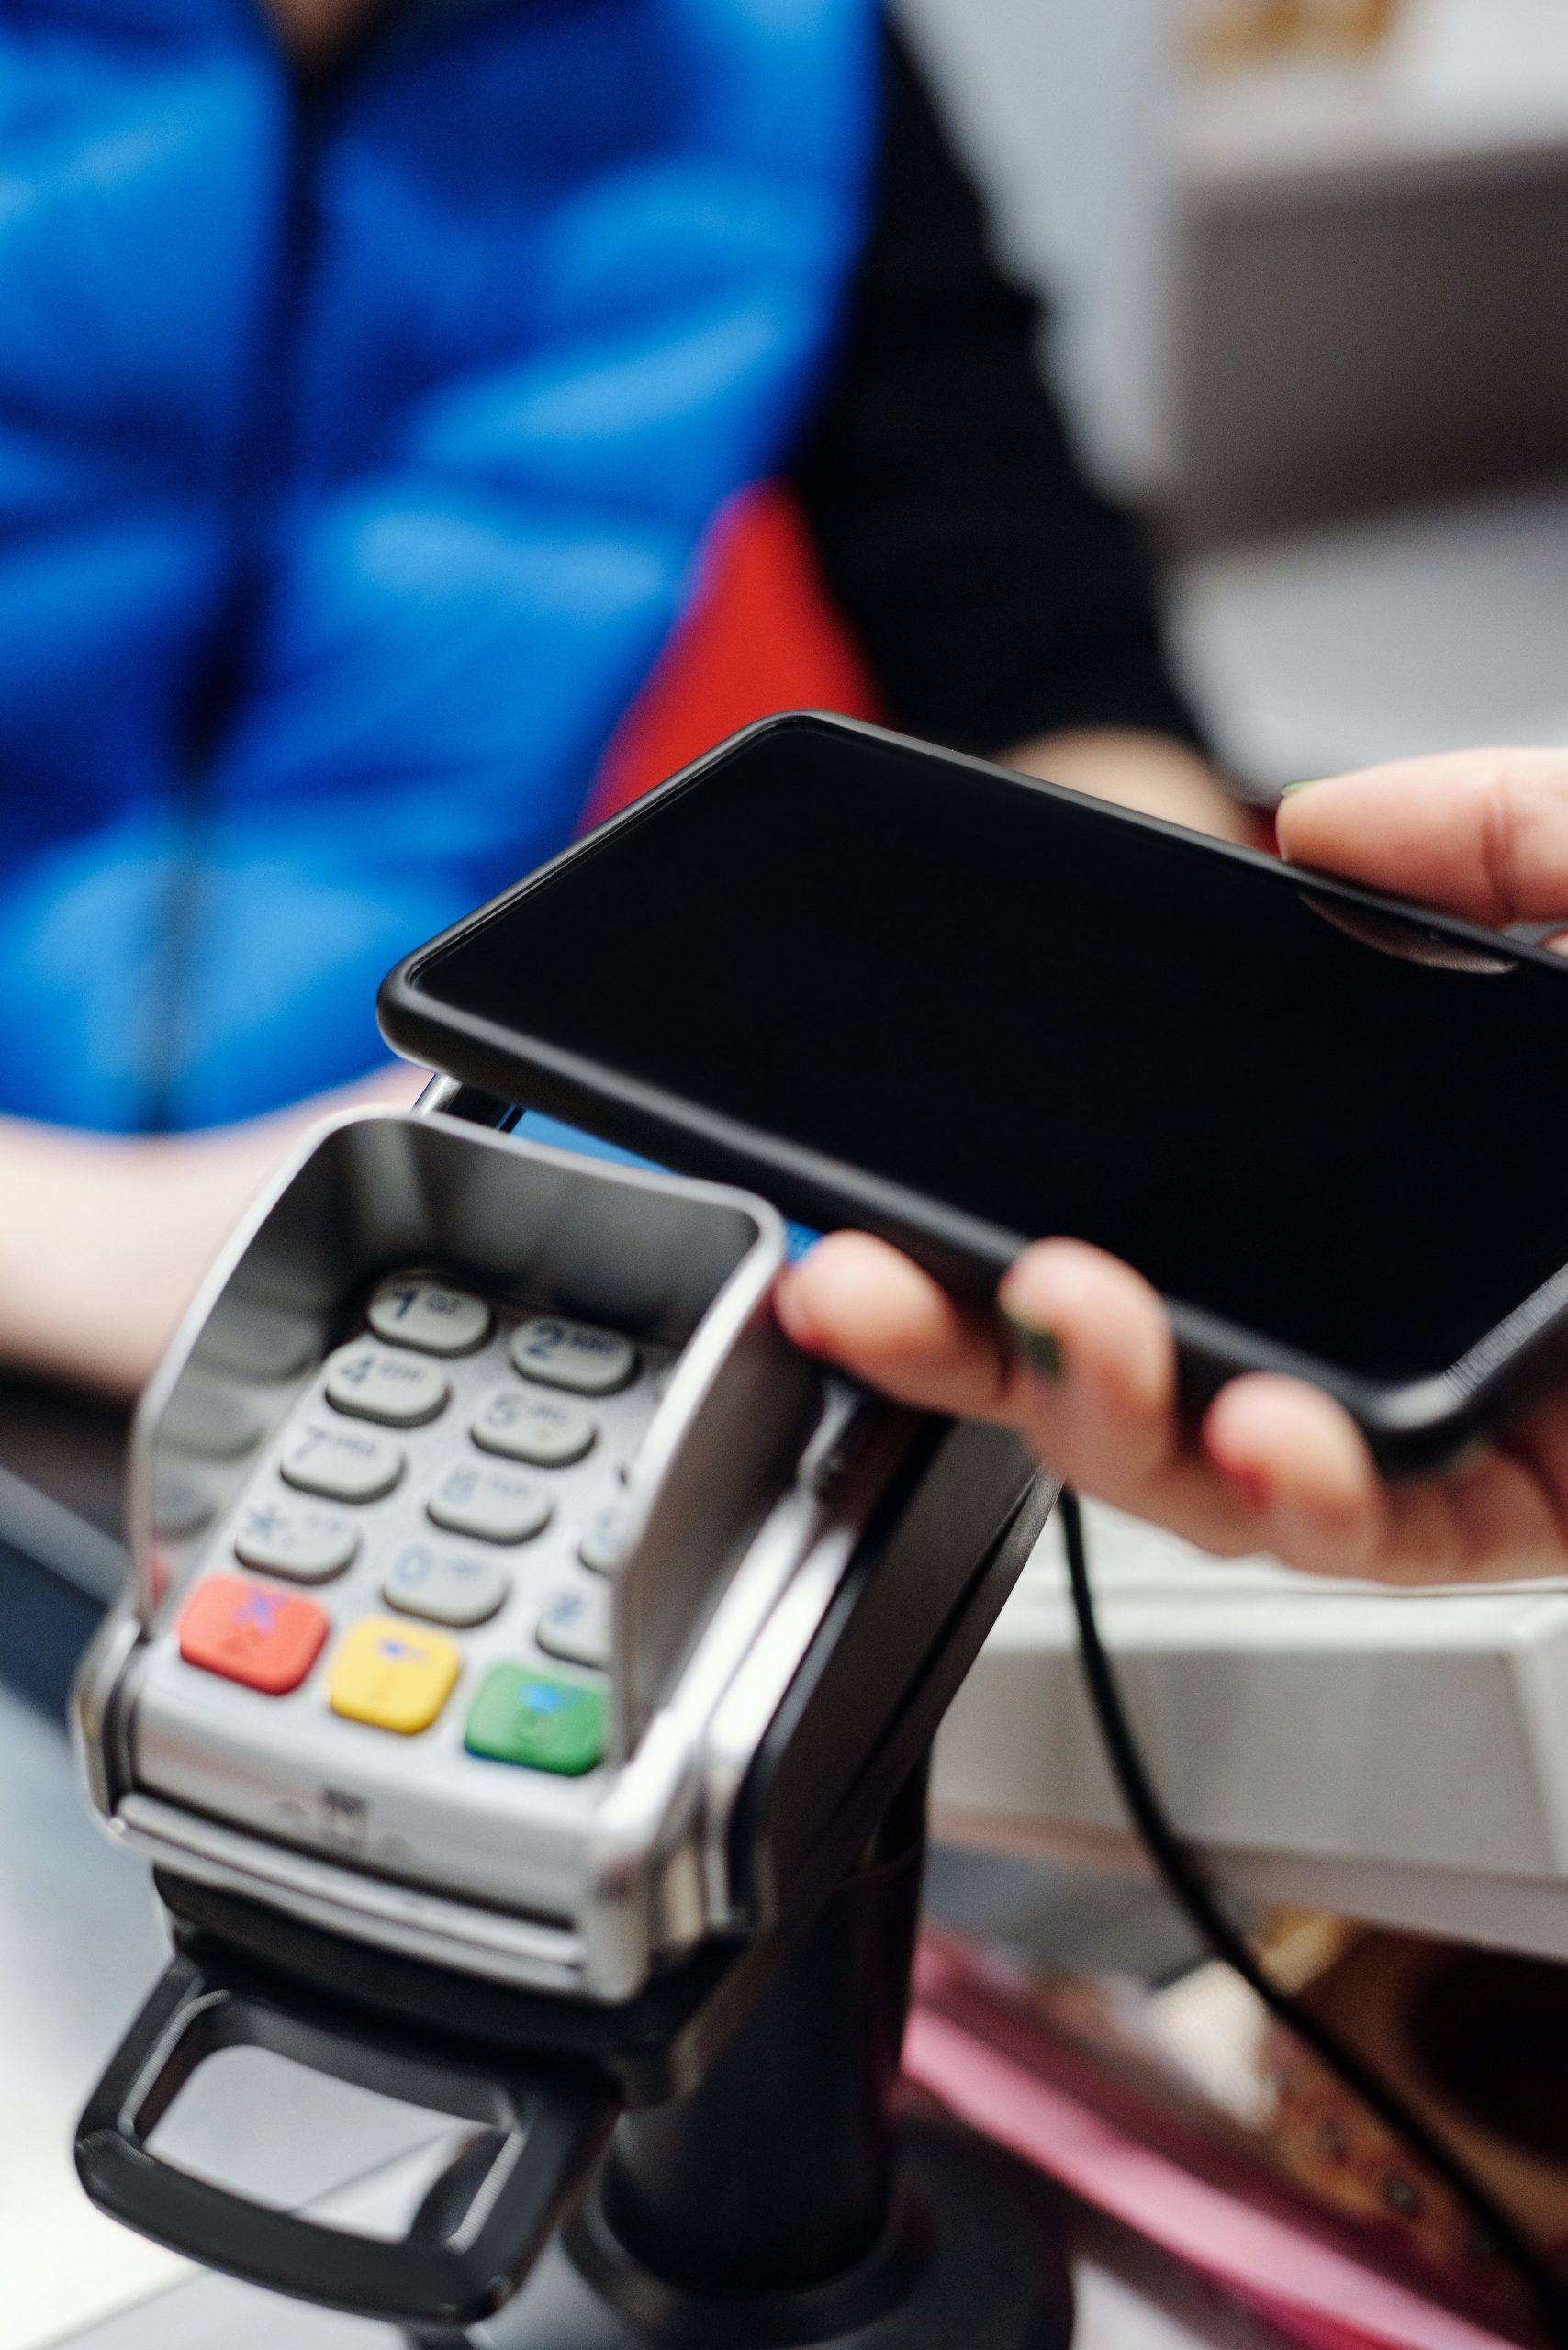 Google Pay uses NFC to complete contactless transactions at payment terminals.